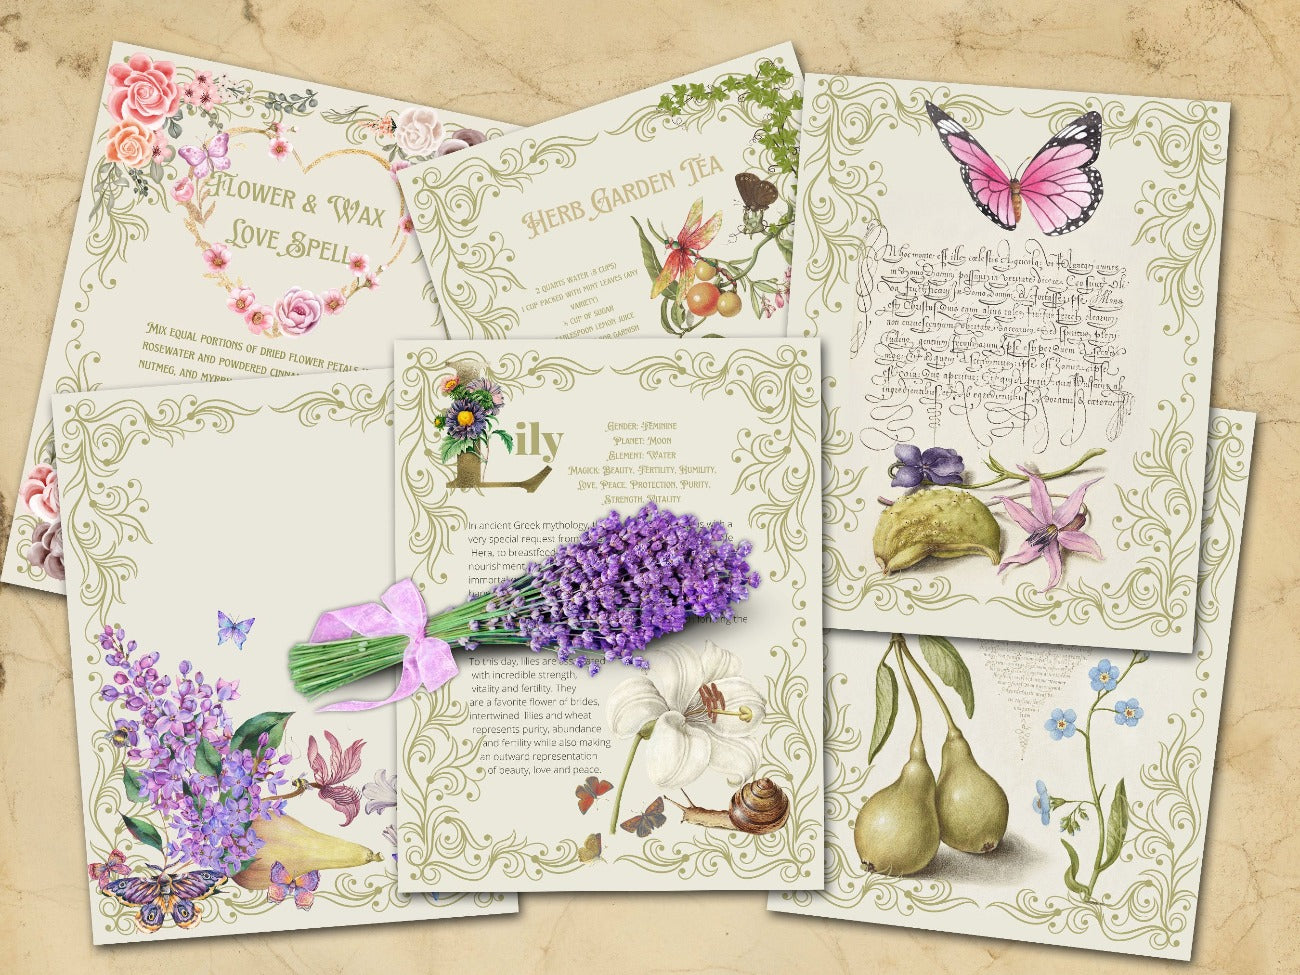 Six Green Witch Journal pages include Lily, 2 fancy floral blank pages, Flower and Wax Love Spell, Herb Garden Tea, and one fancy script floral page - Morgana Magick Spell